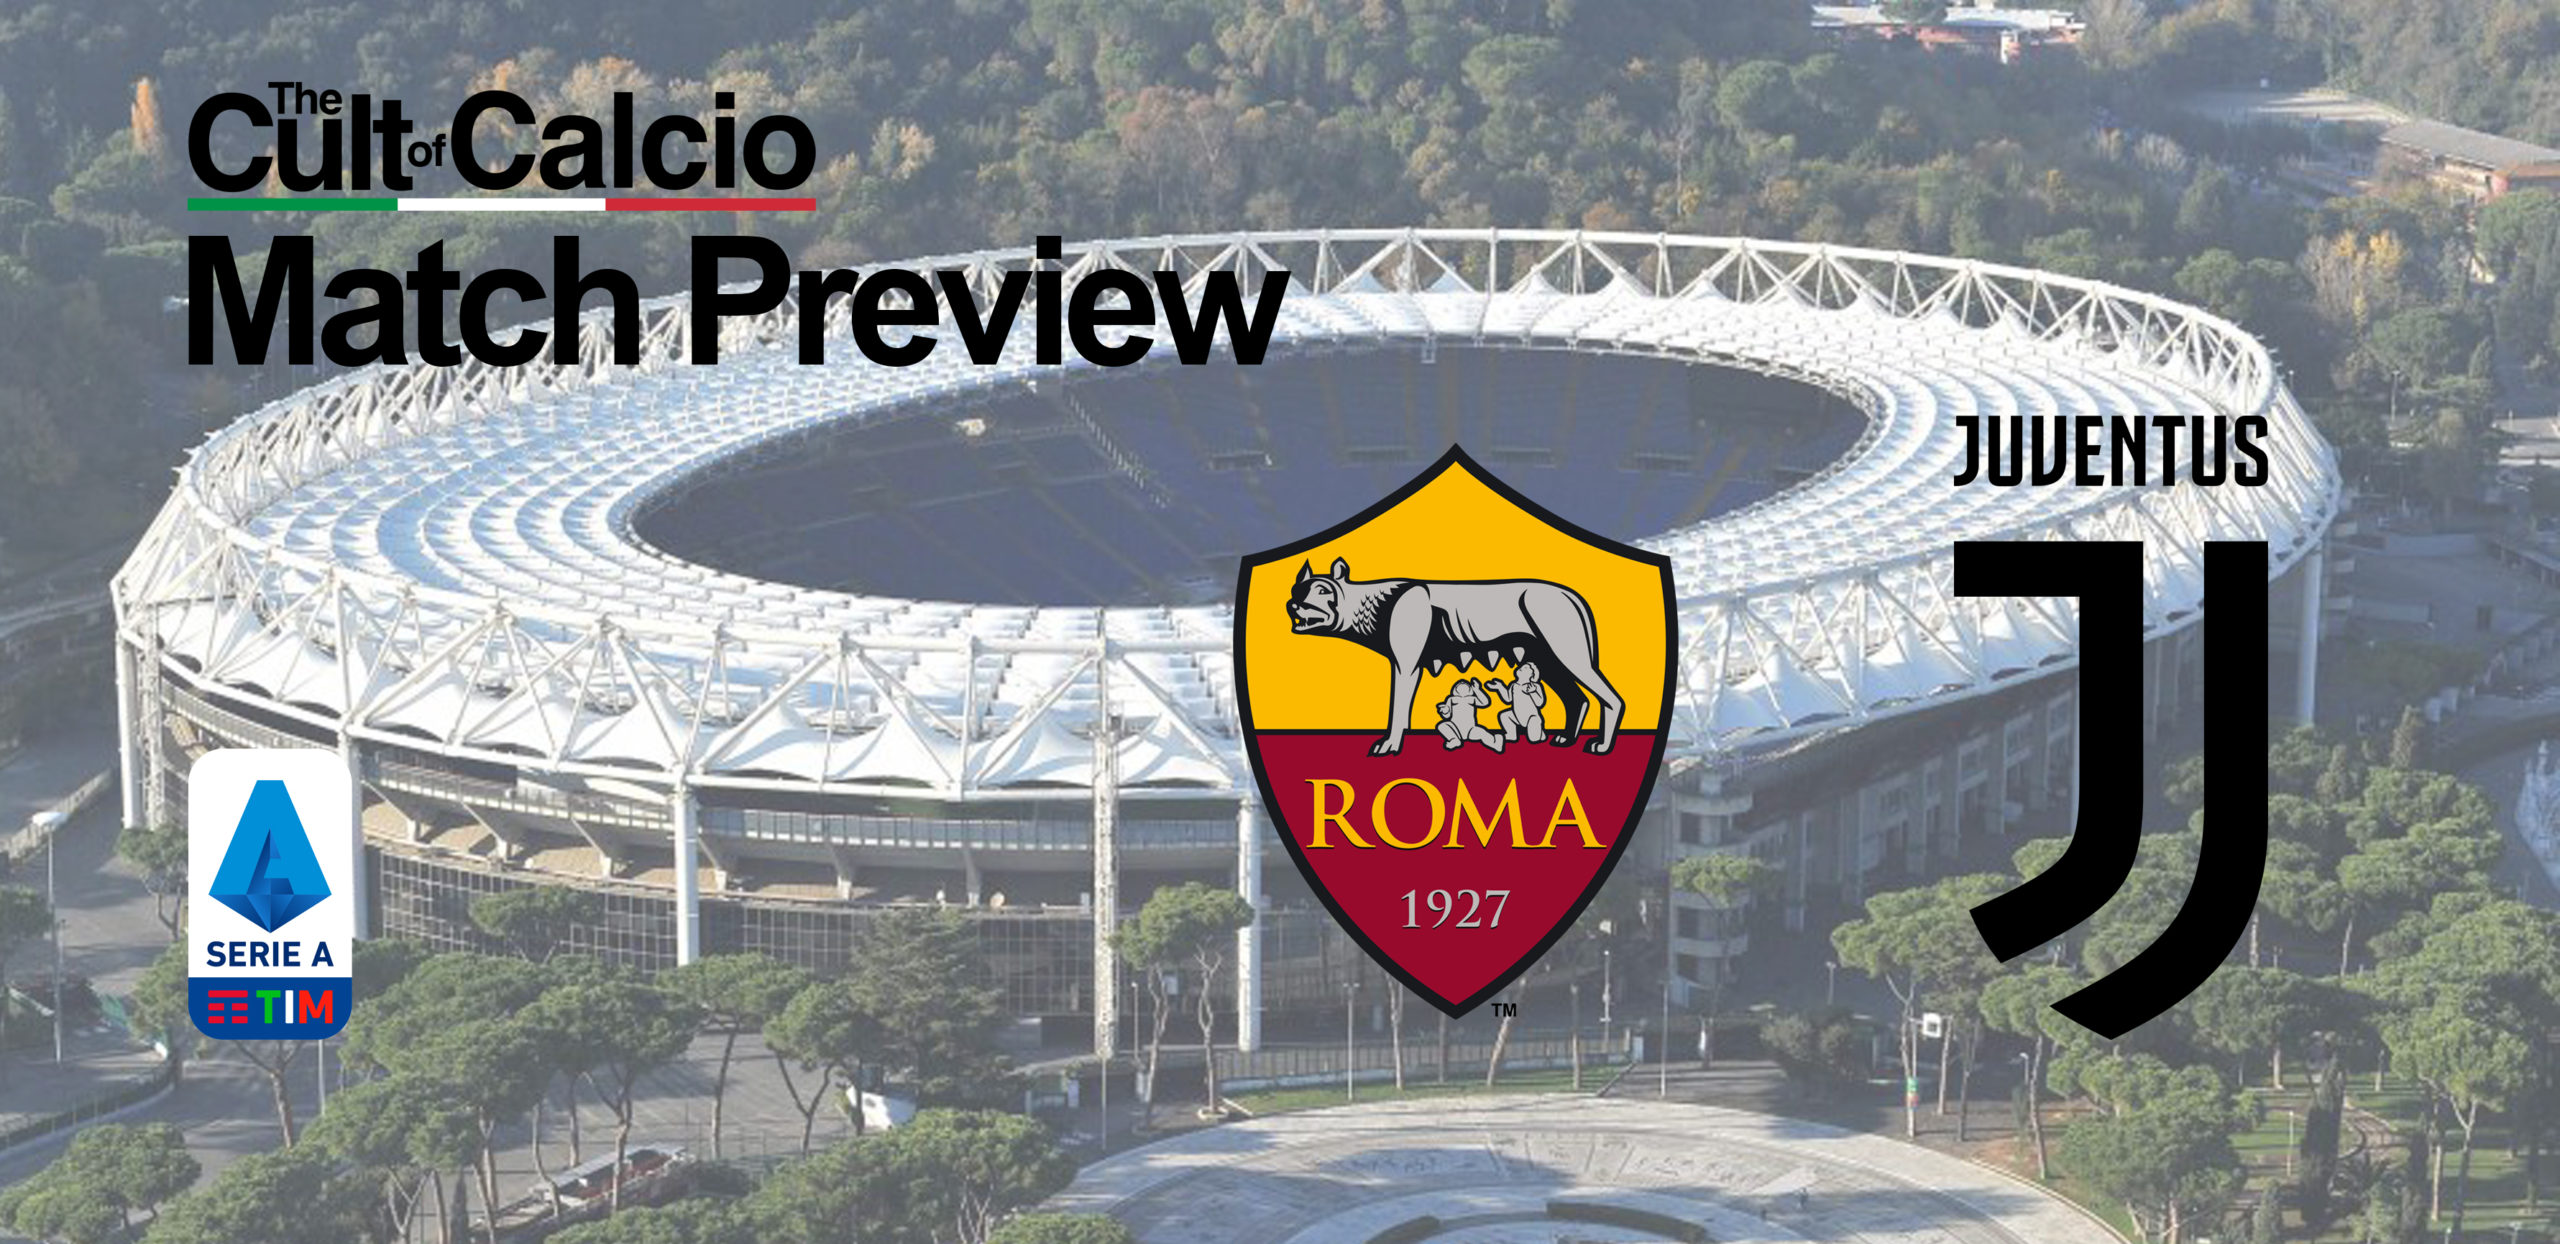 Famed Stadio Olimpico is set to host to Sunday's mouth-watering Serie A encounter between familiar foes, Roma and Juventus